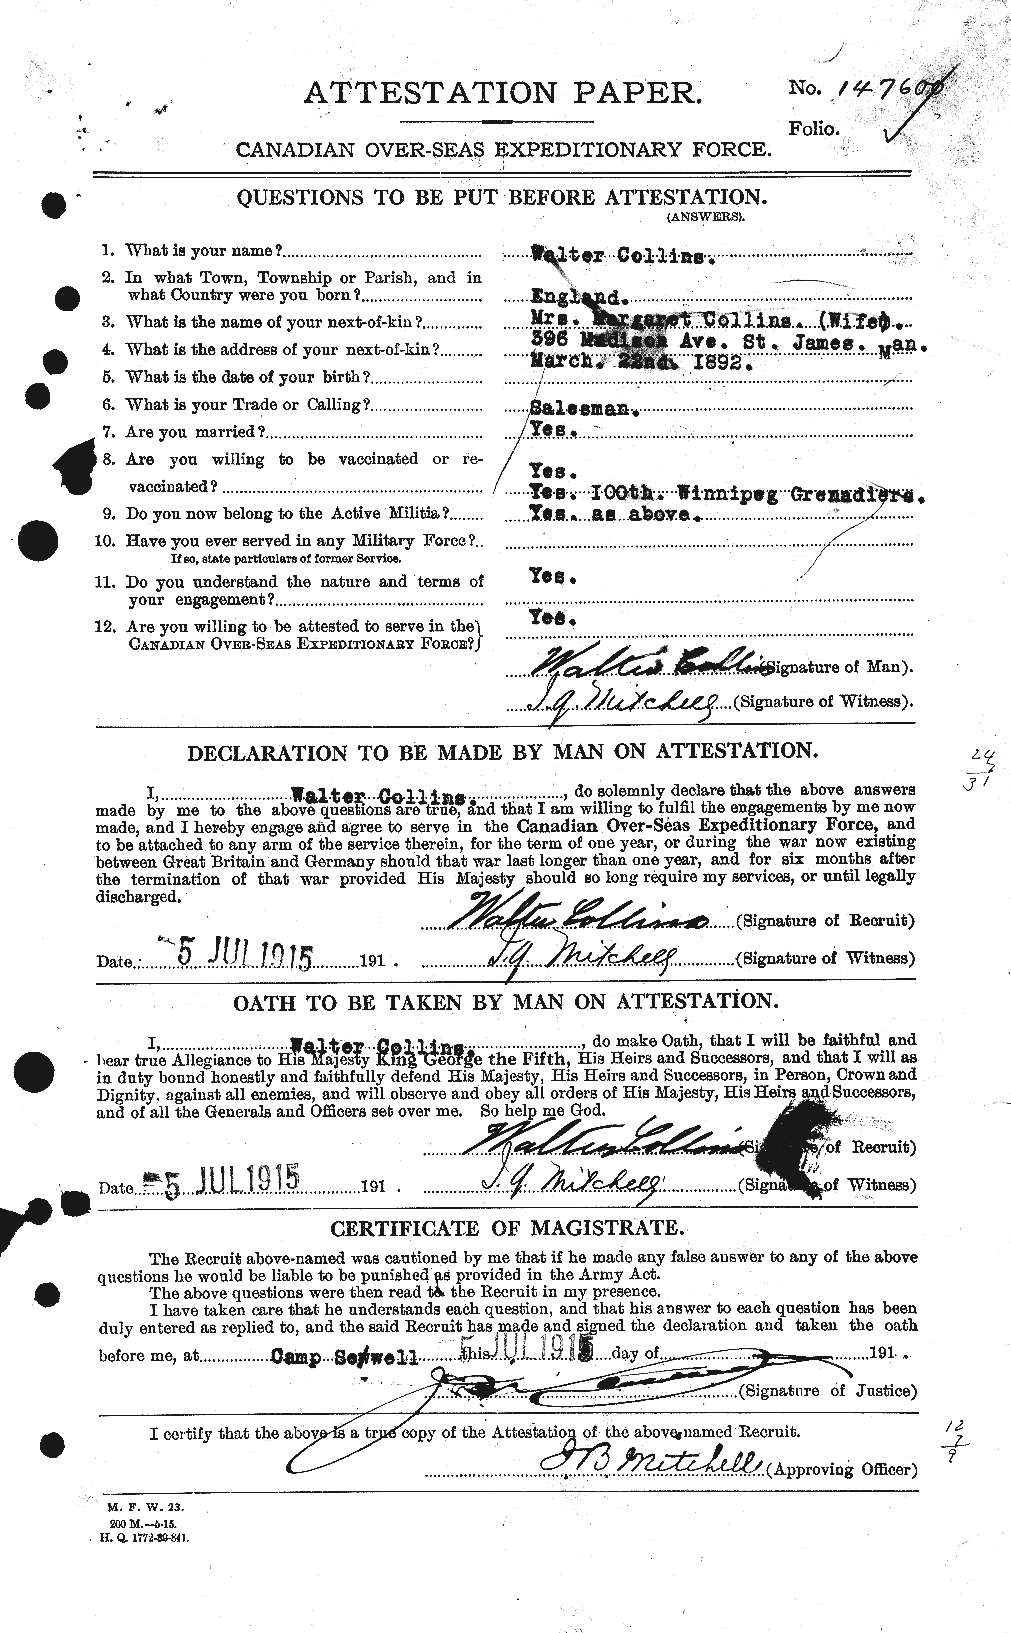 Personnel Records of the First World War - CEF 068837a